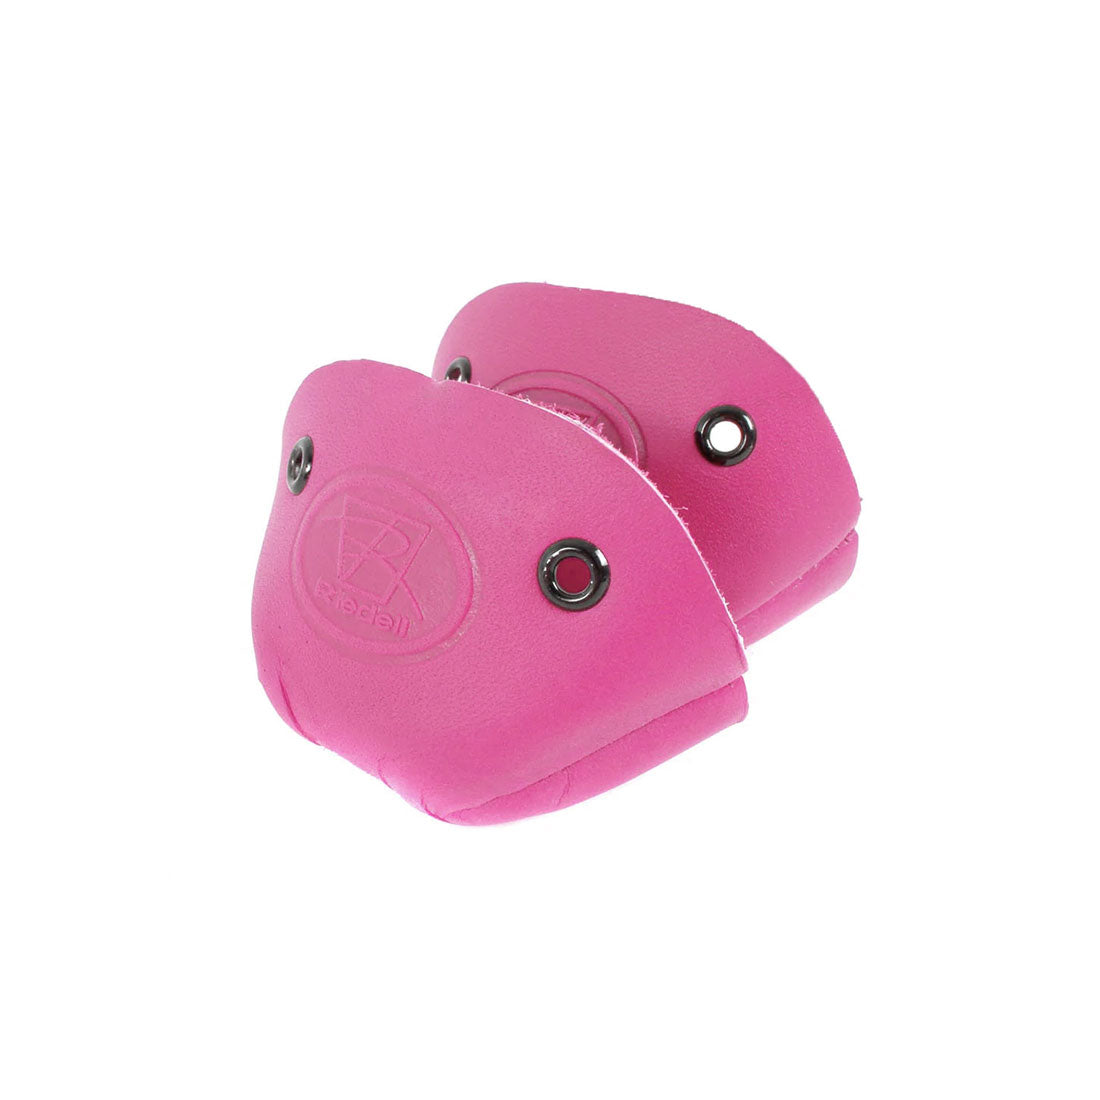 Riedell Toe Cap 2pk - Leather Pink Roller Skate Hardware and Parts